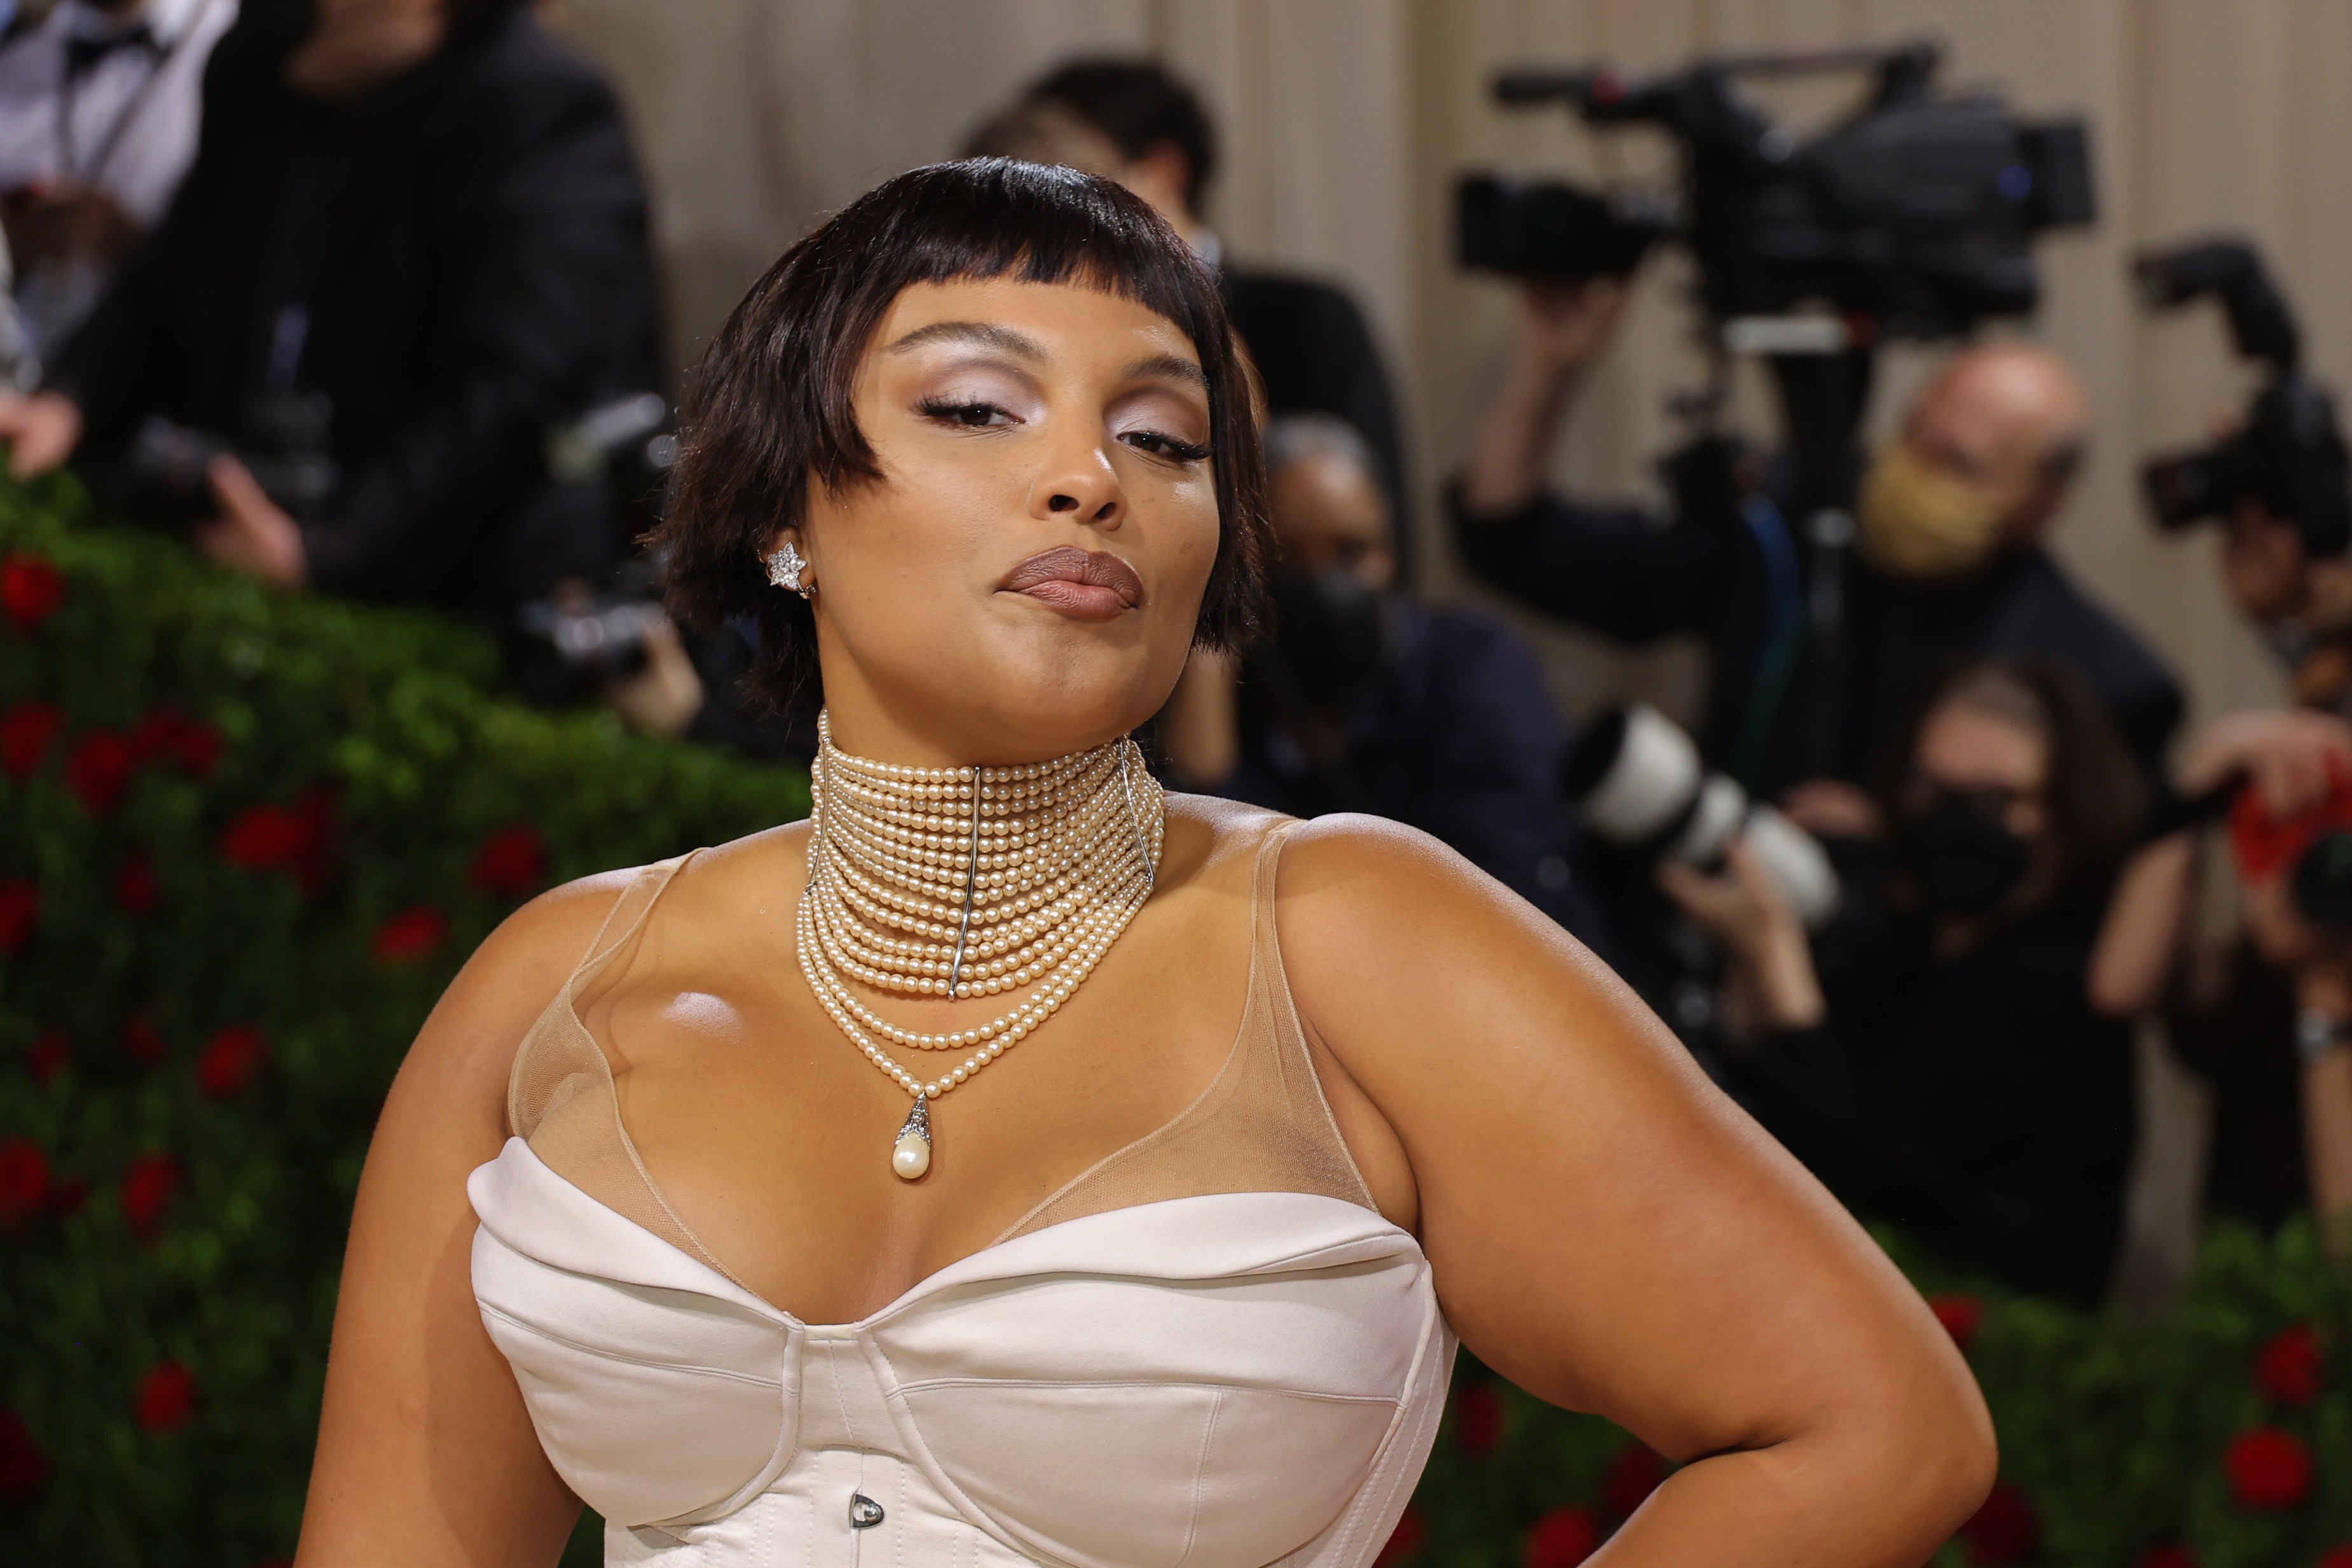 NEW YORK, NEW YORK - MAY 02: Paloma Elsesser attends The 2022 Met Gala Celebrating "In America: An Anthology of Fashion" at The Metropolitan Museum of Art on May 02, 2022 in New York City. (Photo by Mike Coppola/Getty Images) (Foto: Getty Images)